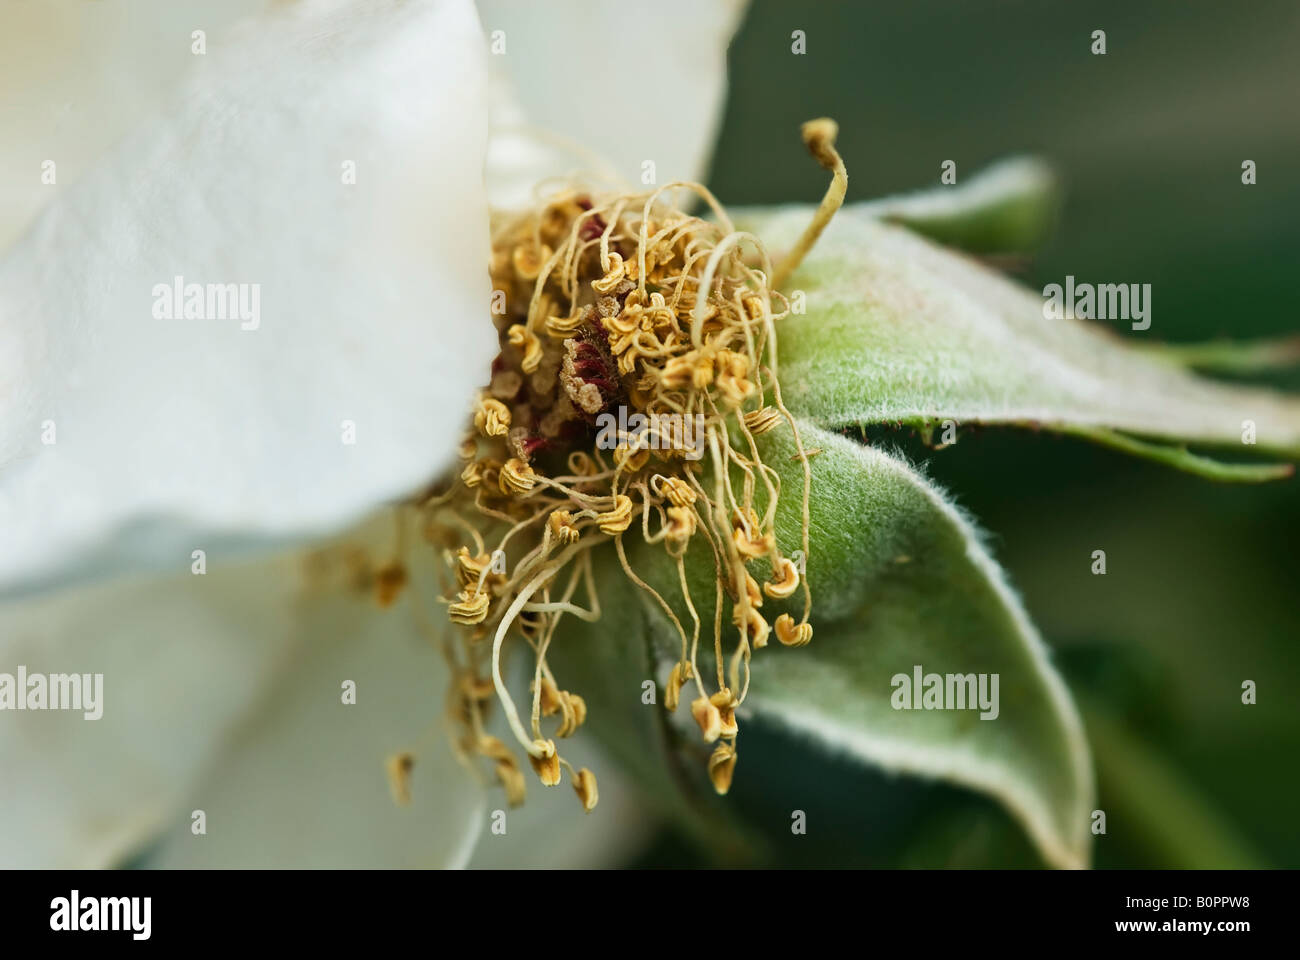 Image of white rose deadhead.  Stock Photography by cahyman. Stock Photo